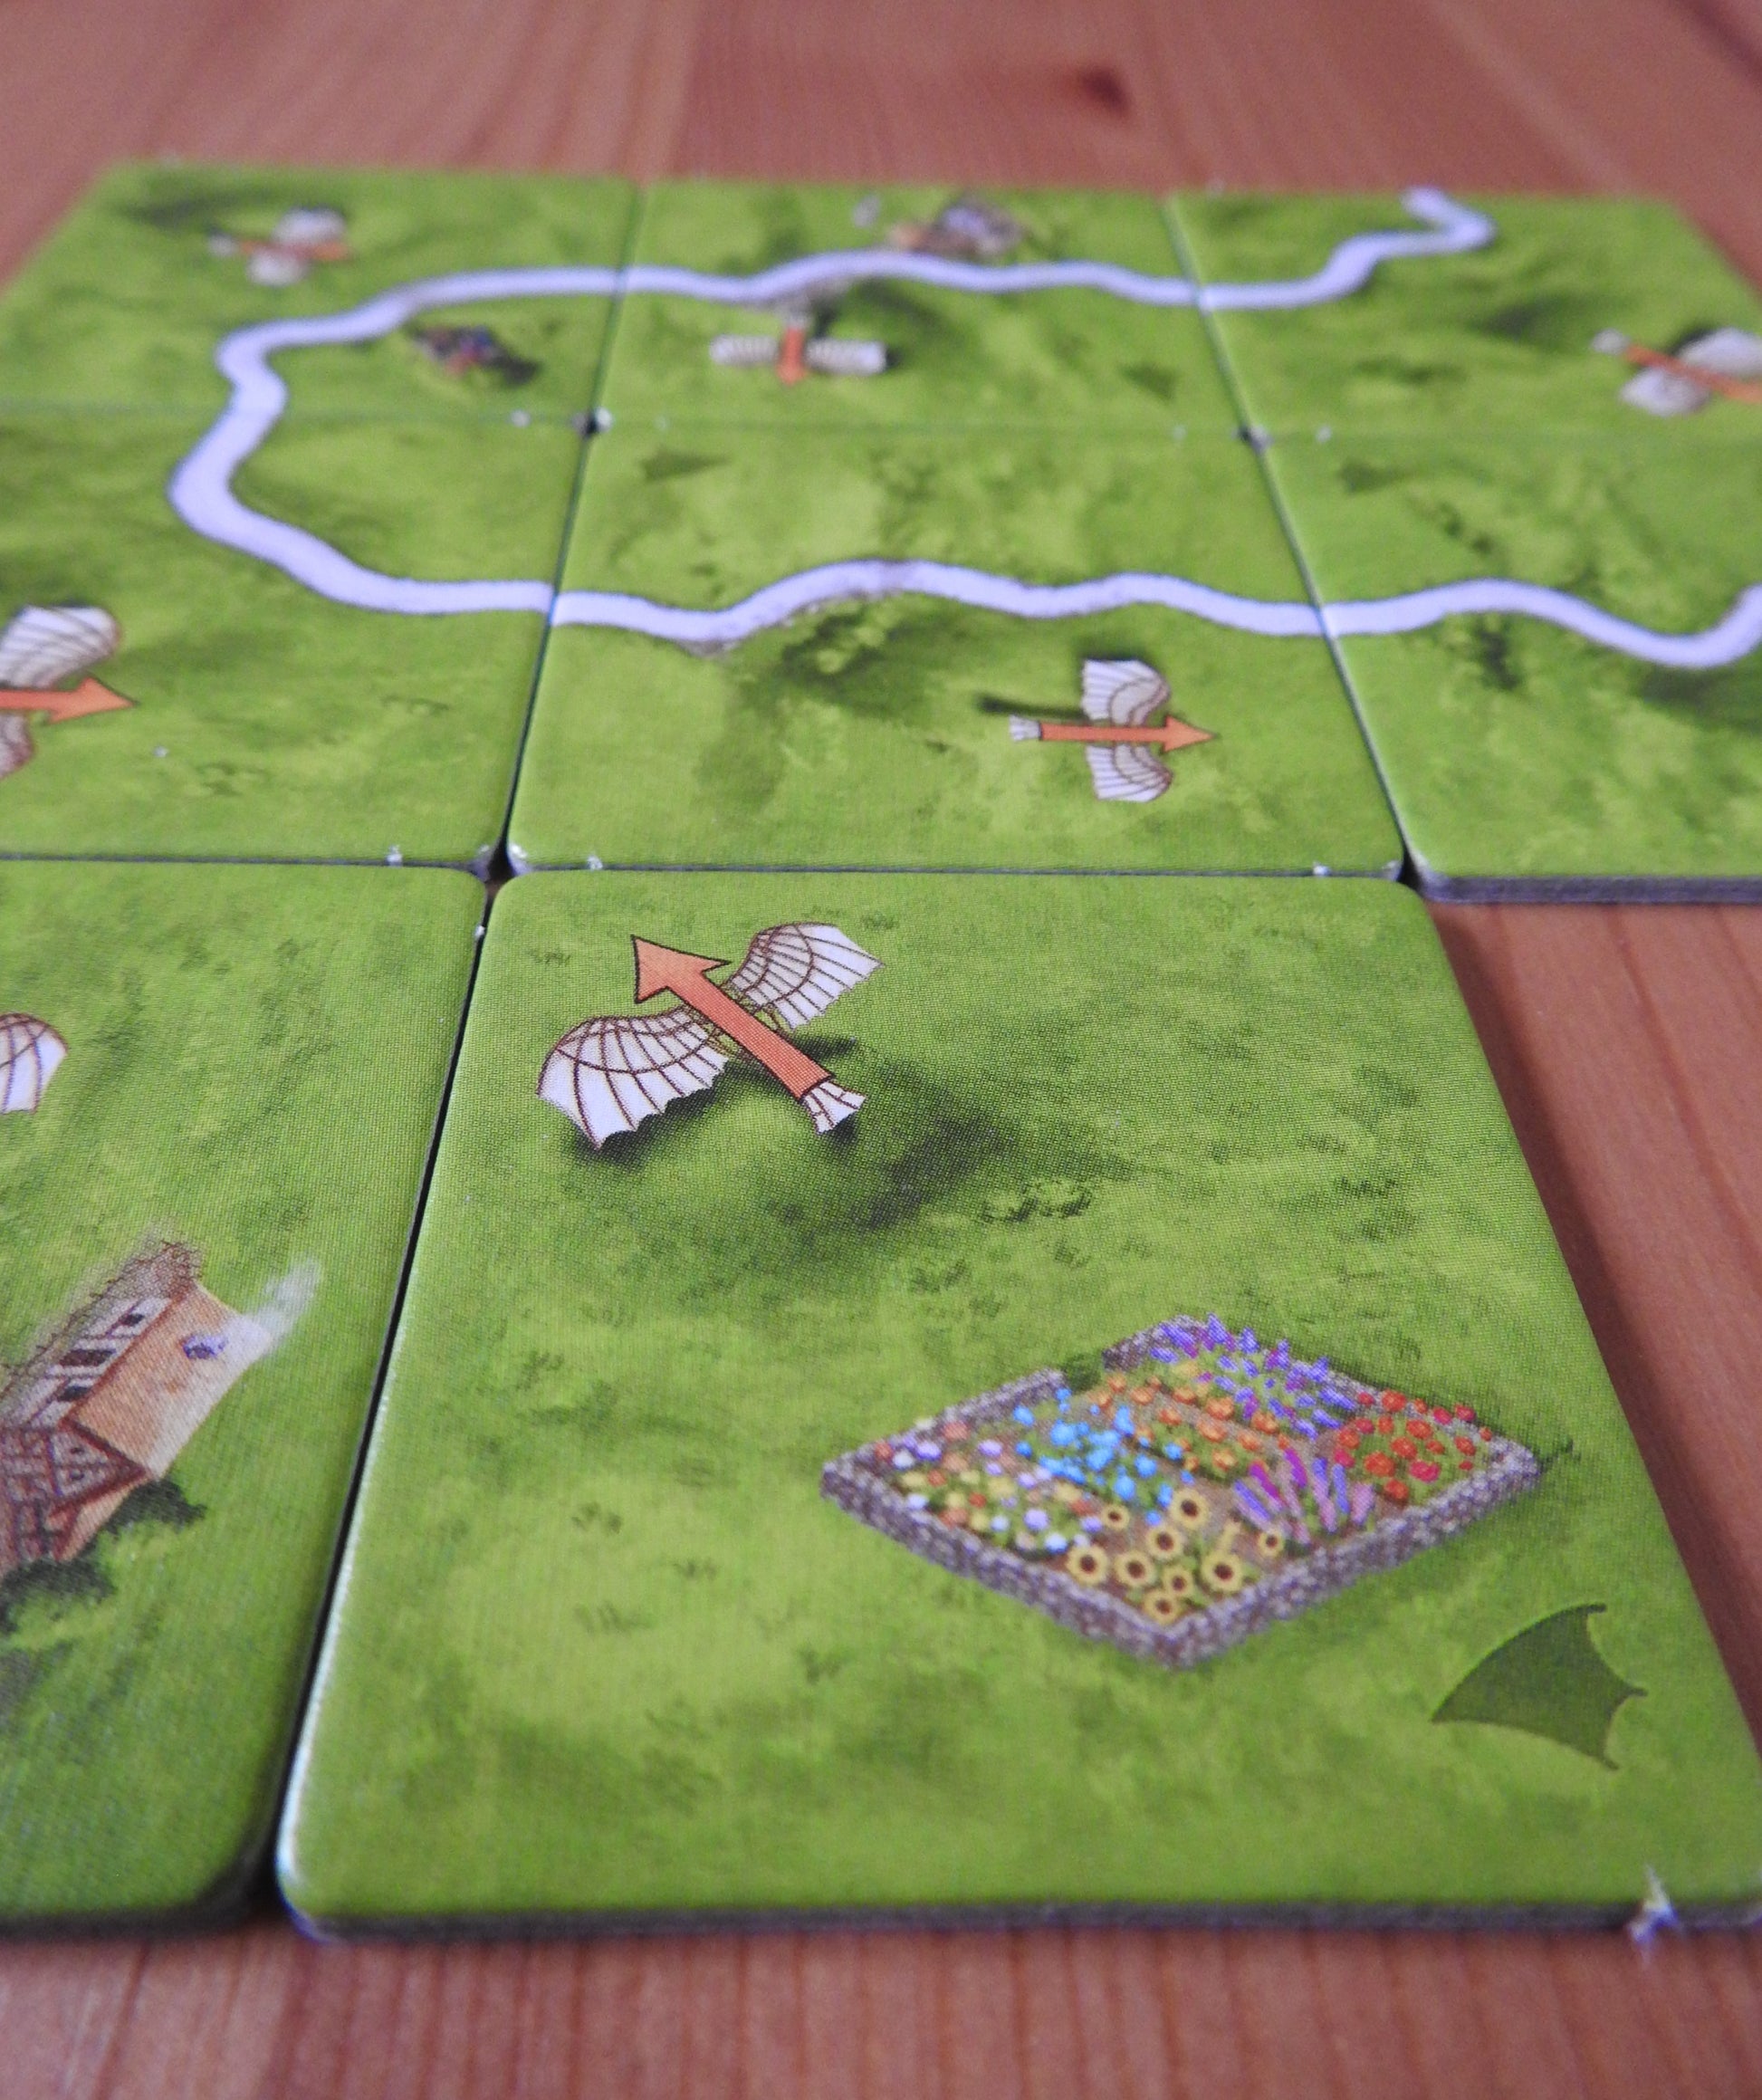 A closer view of the lovely artwork on the tiles in this Carcassonne Flying Machines mini expansion.